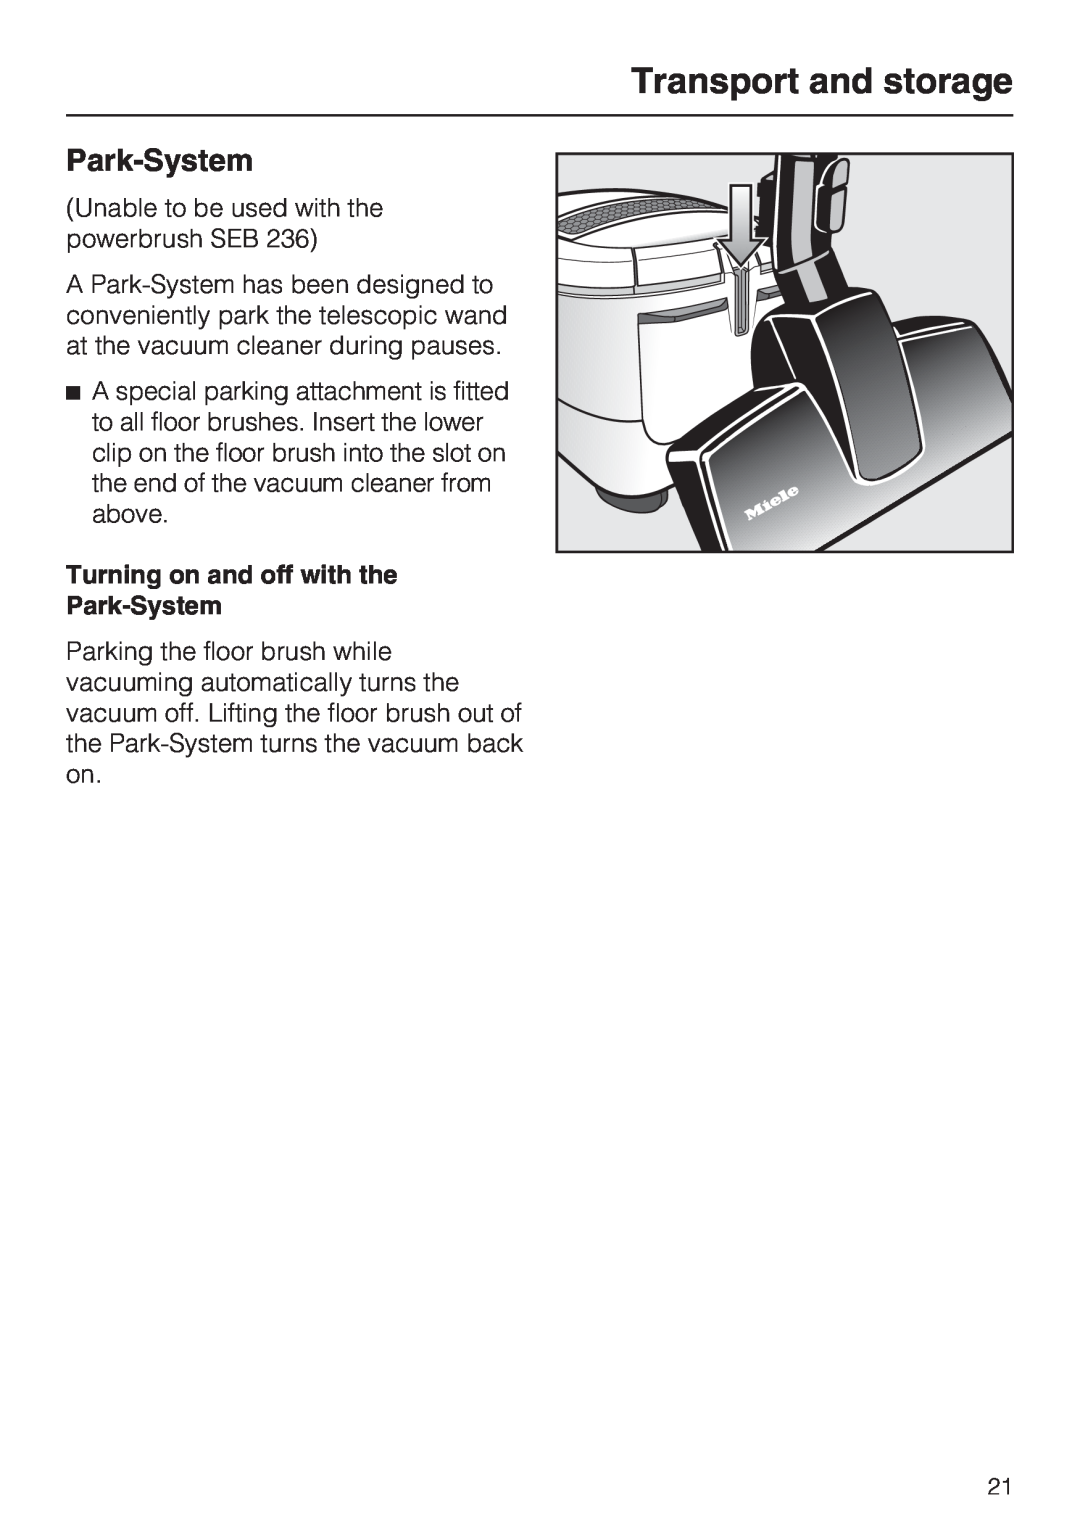 Miele S 5980 operating instructions Transport and storage, Park-System 